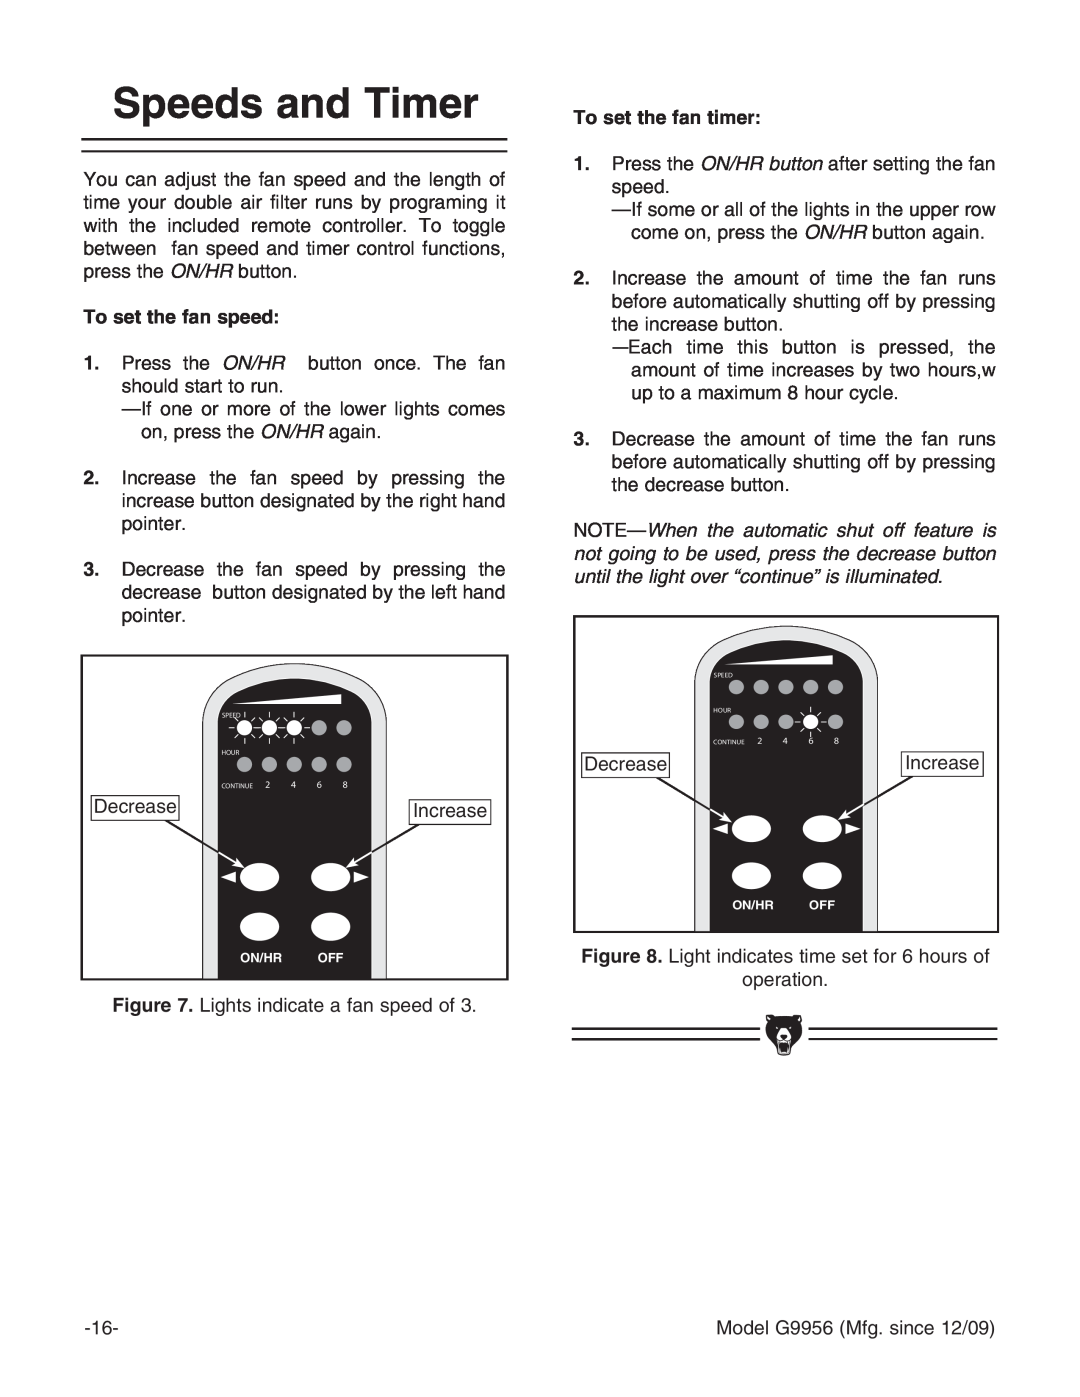 Grizzly G9956 instruction manual Speeds and Timer, Decrease, Increase 